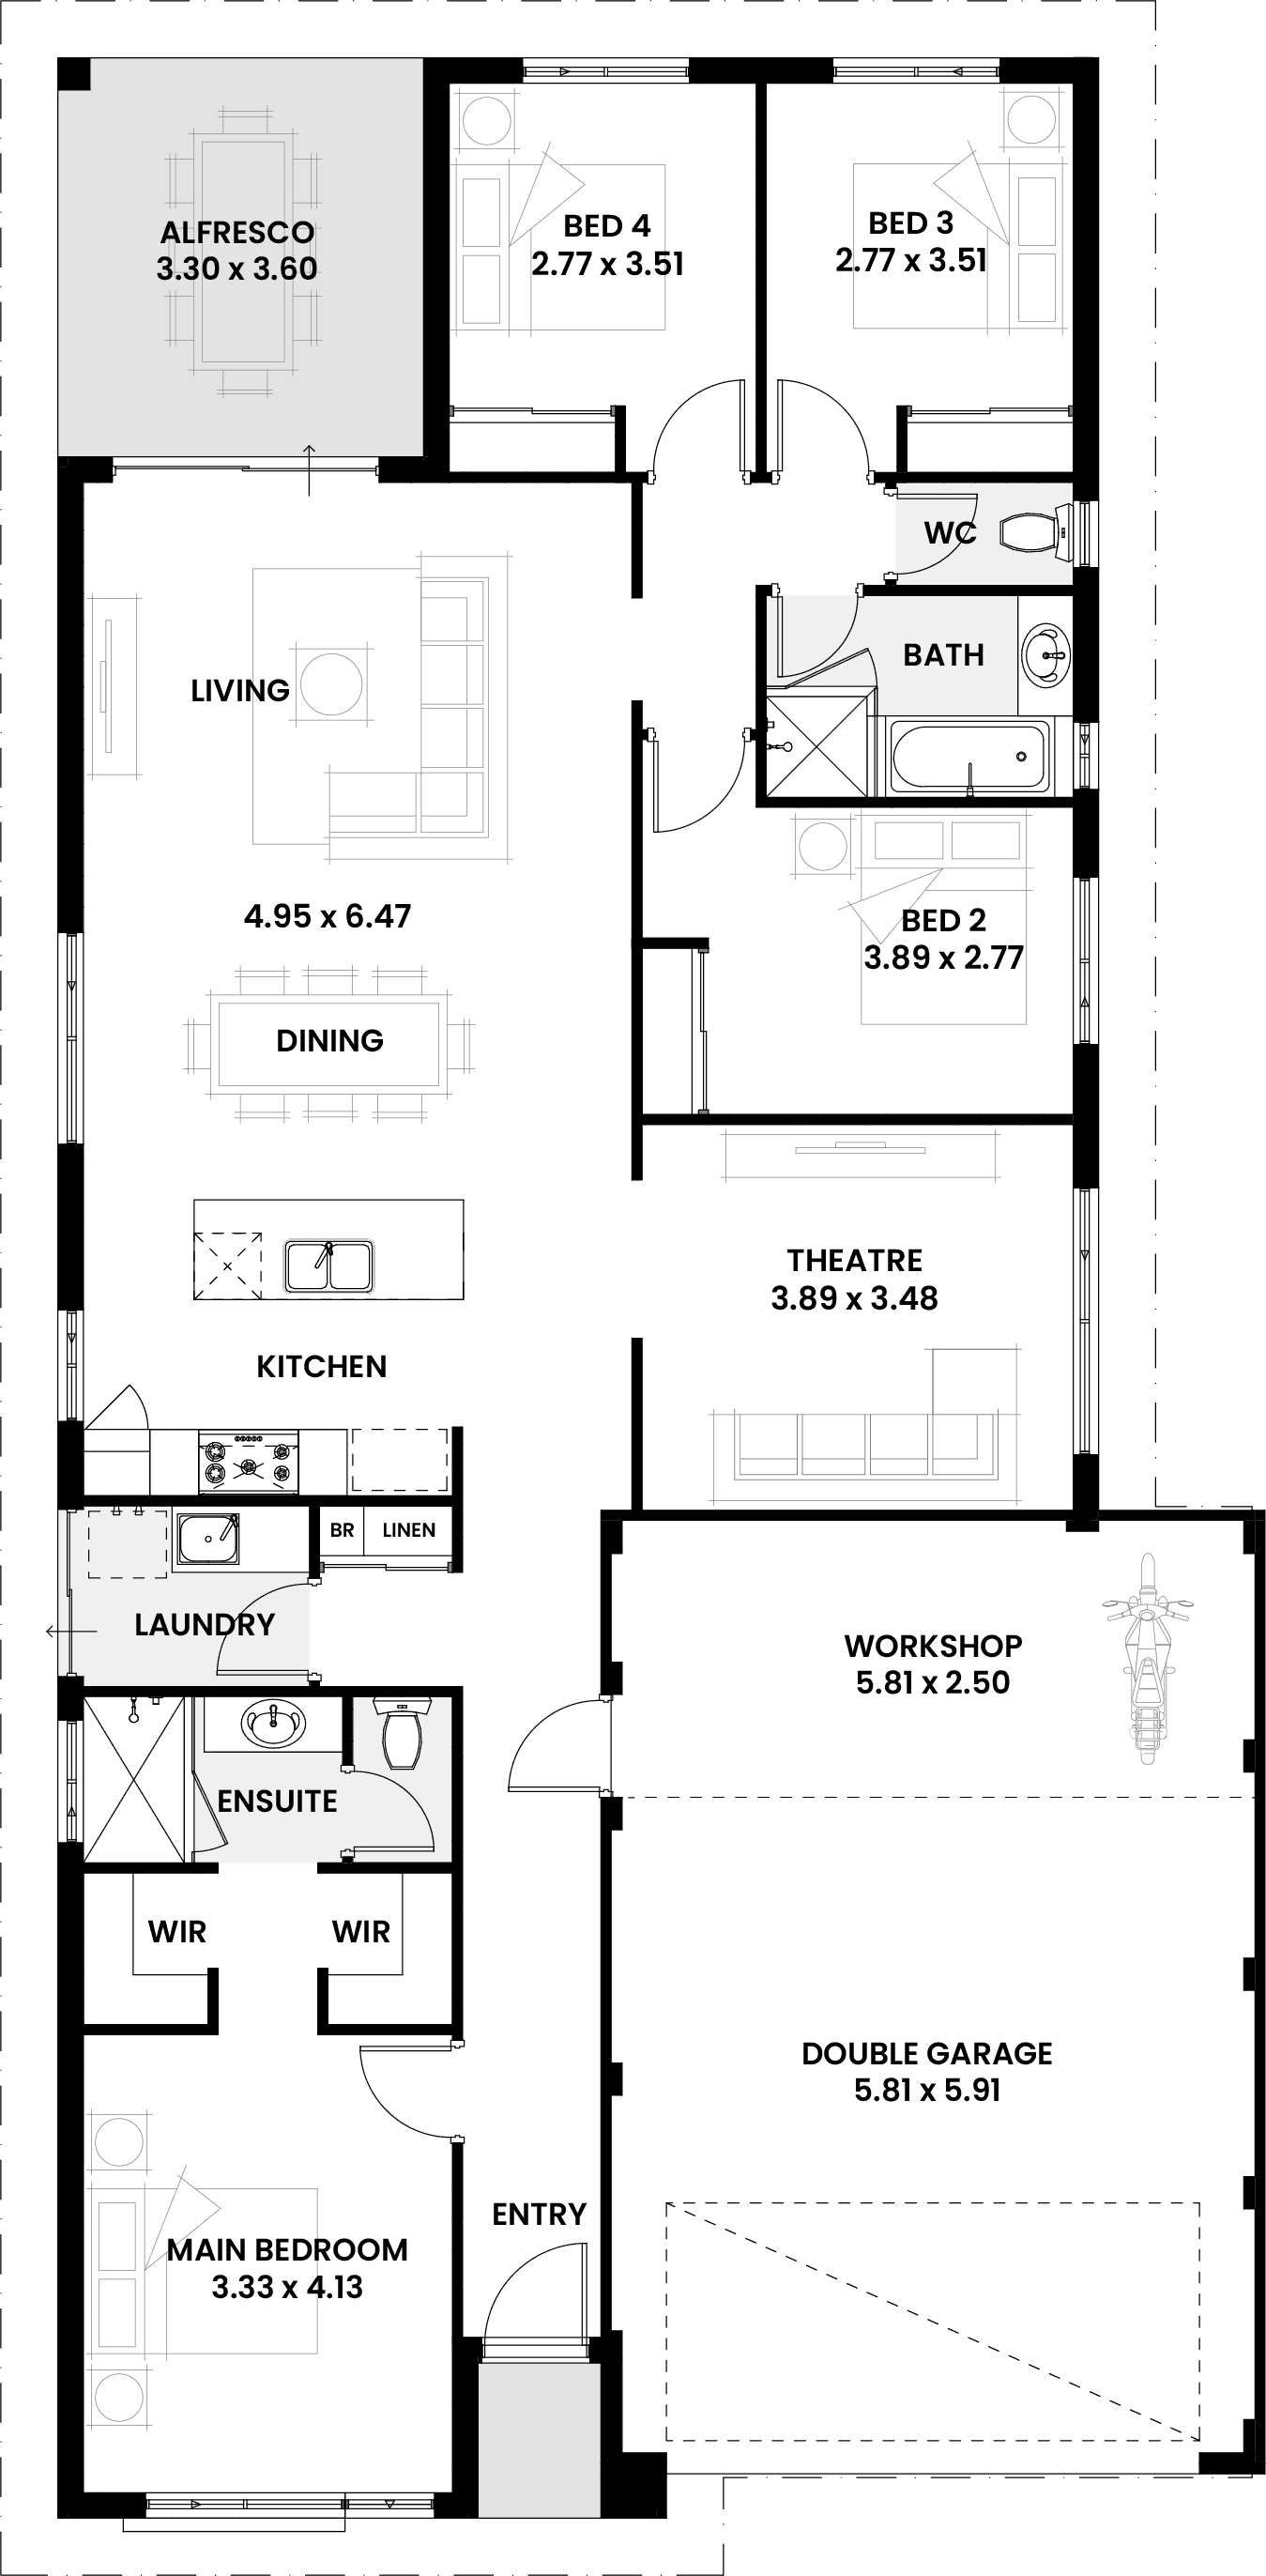 Floorplan for The Vine, a Move Homes new home design perfect for first time buyers and new builders in Perth